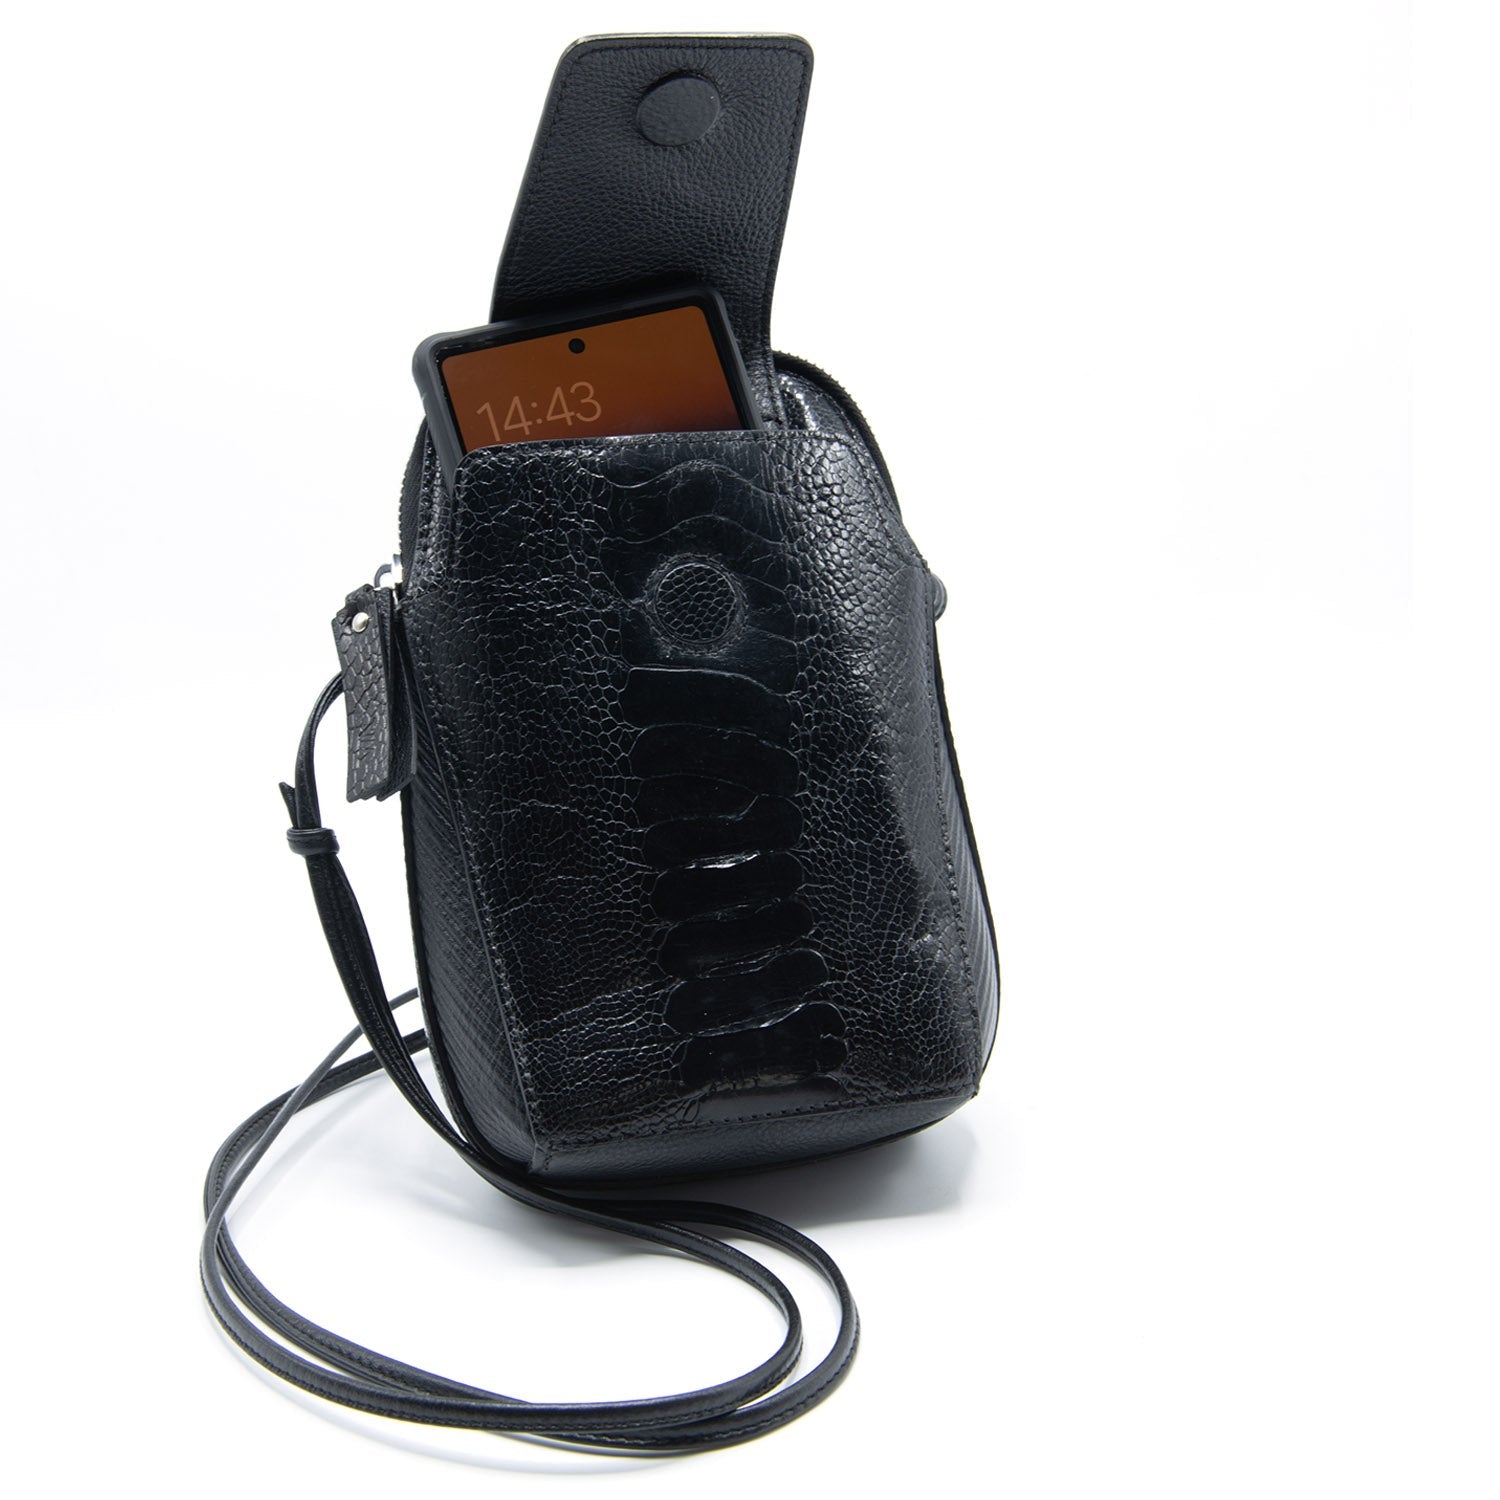 Ostrich Shin Leather Phone Bag for Sale Online